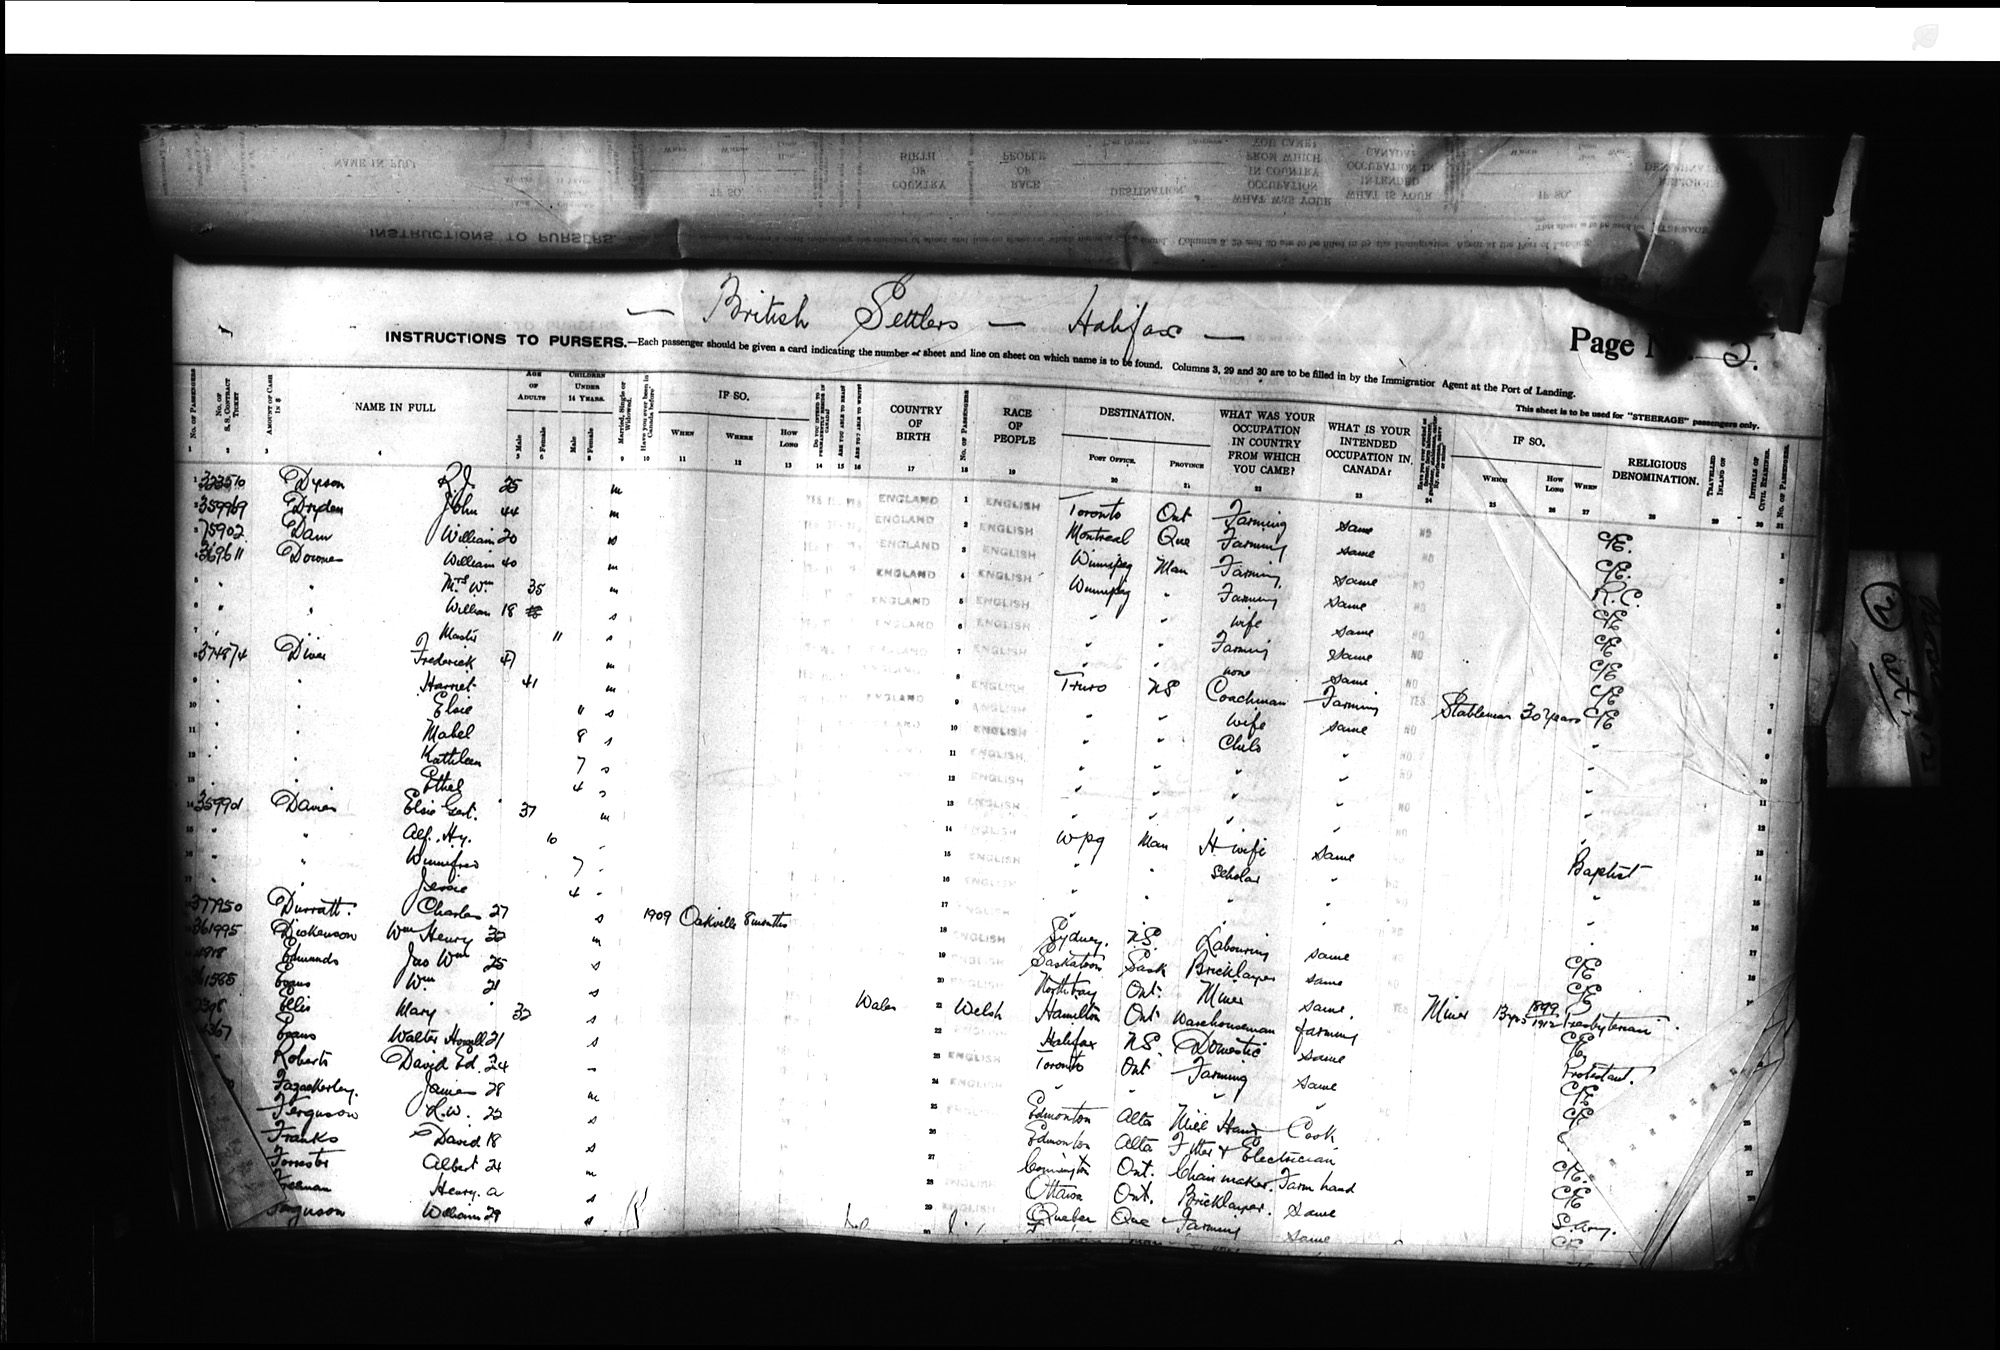 Digitized page of Passenger Lists for Image No.: CANIMM1913PLIST_0000406960-00160